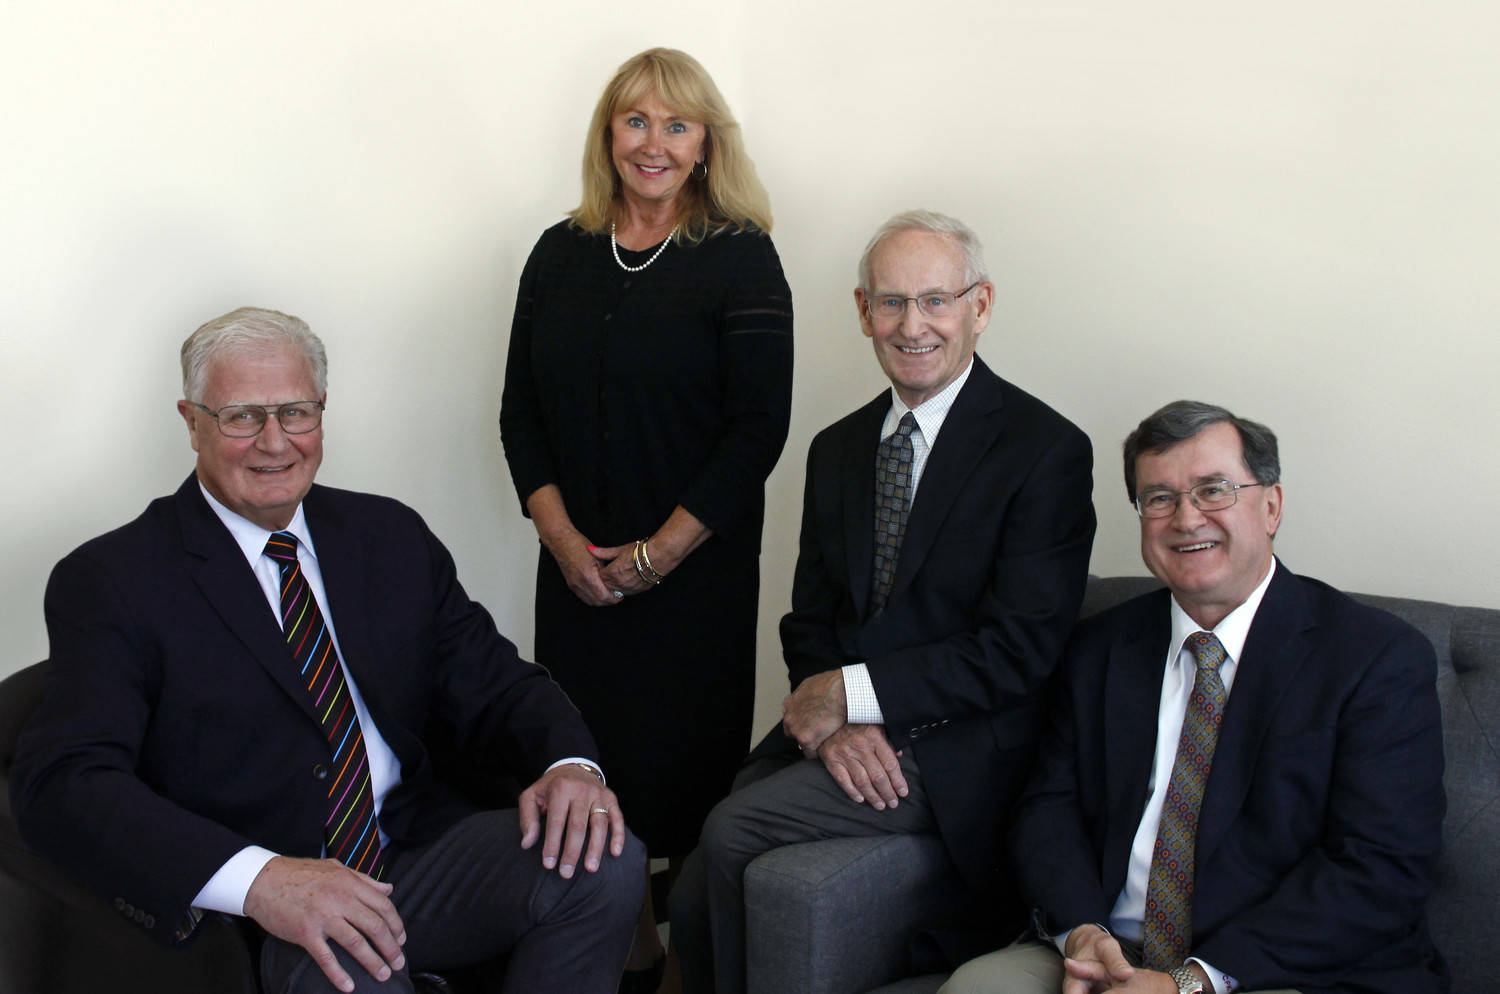 Learn more about Perry Tech's Board of Trustees who govern Perry Technical Institute.